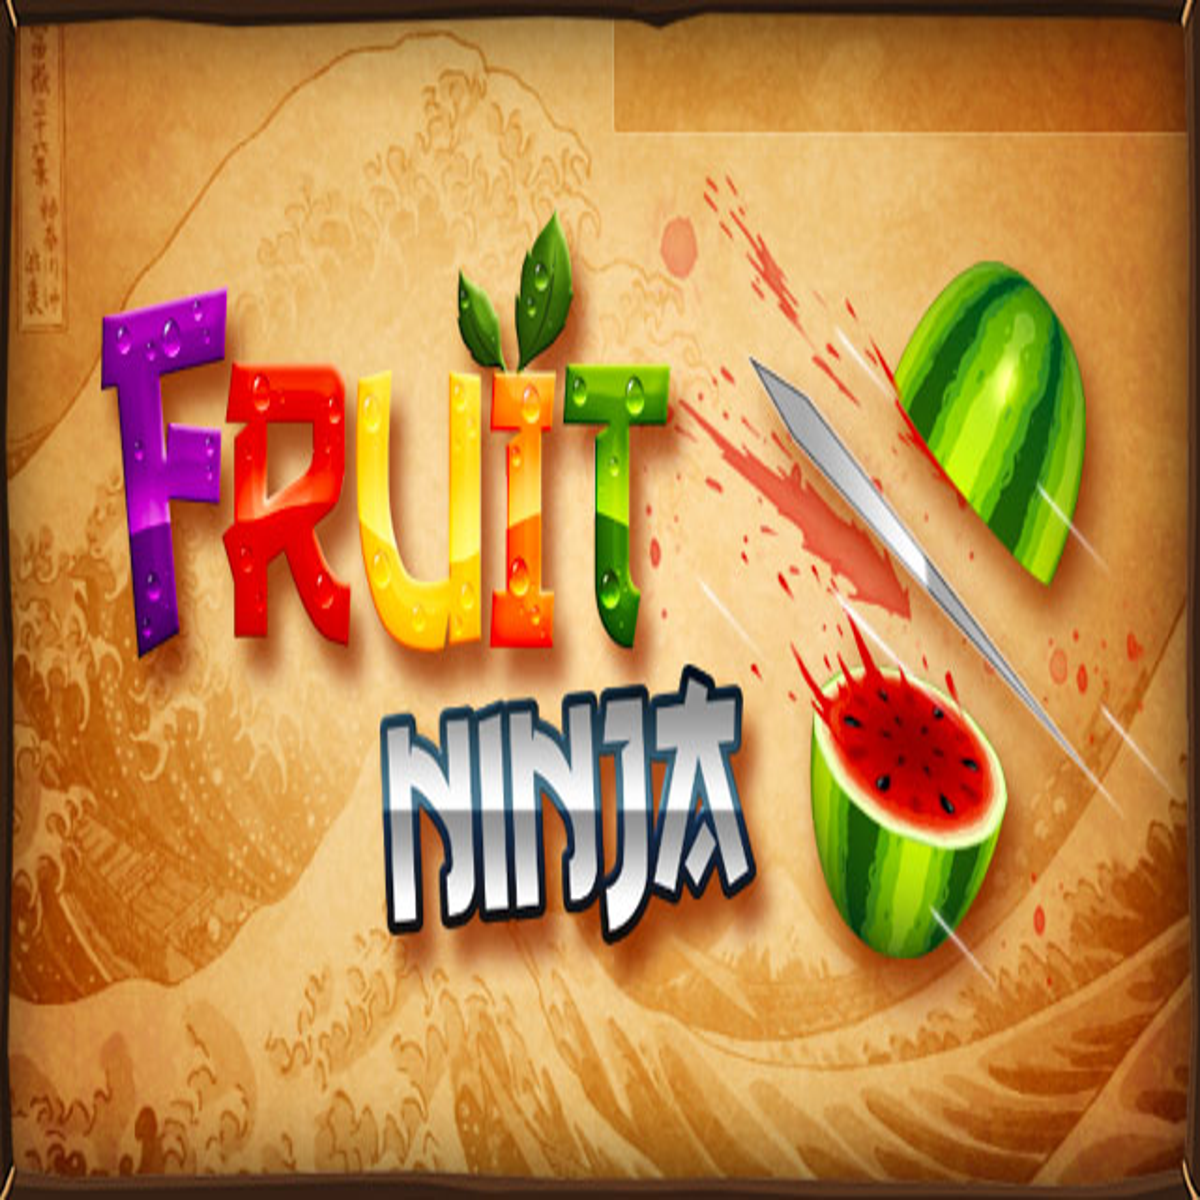 Halfbrick Opens Up An Official Online Store Of Fruit Ninja Merchandise,  Including Some Brand New Plushies